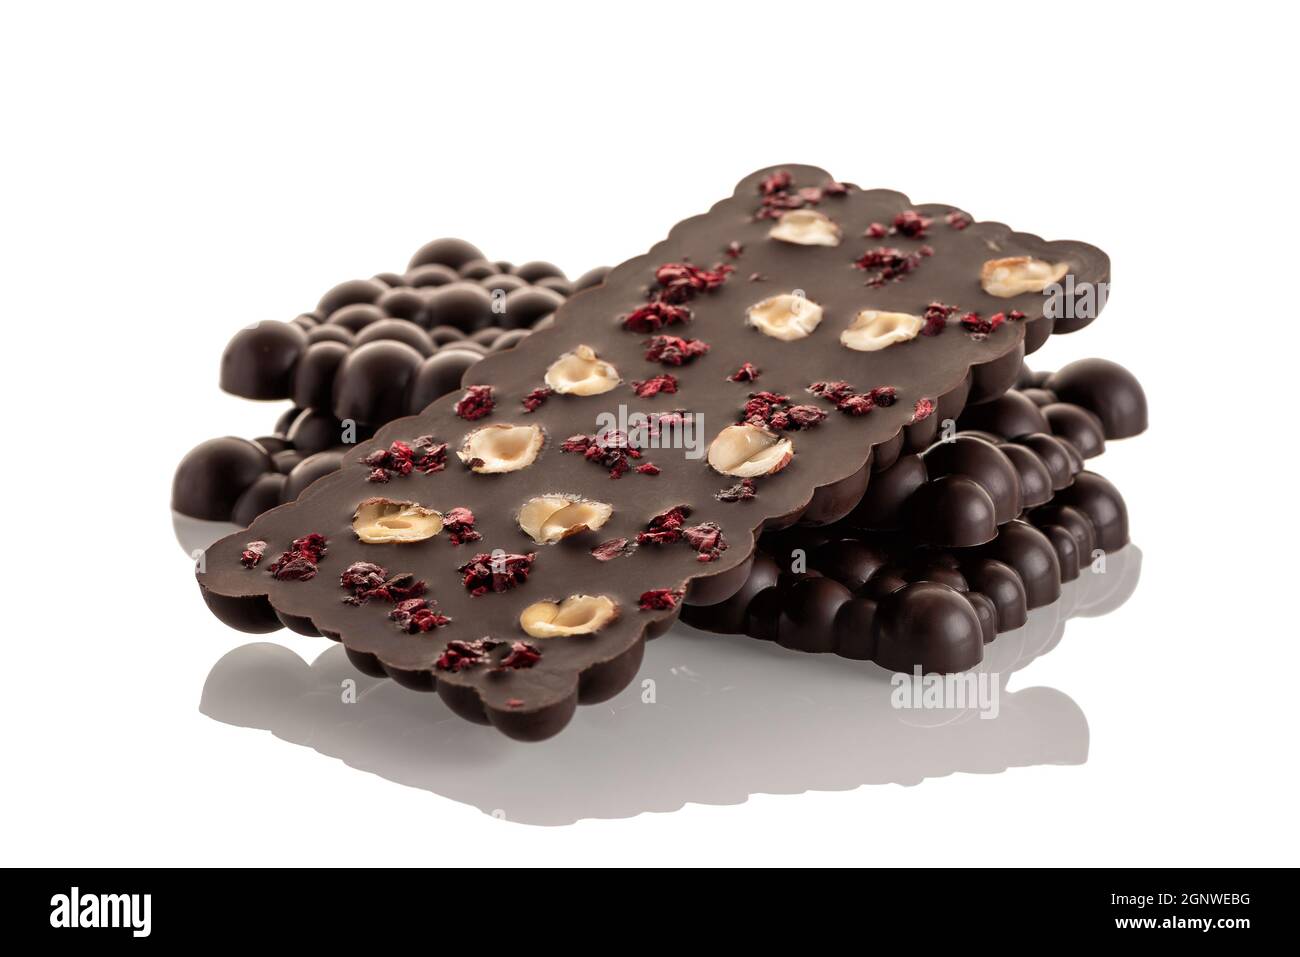 Dark raw chocolate with haselnut and freeze-dried cherries on a white background. Isolate Stock Photo